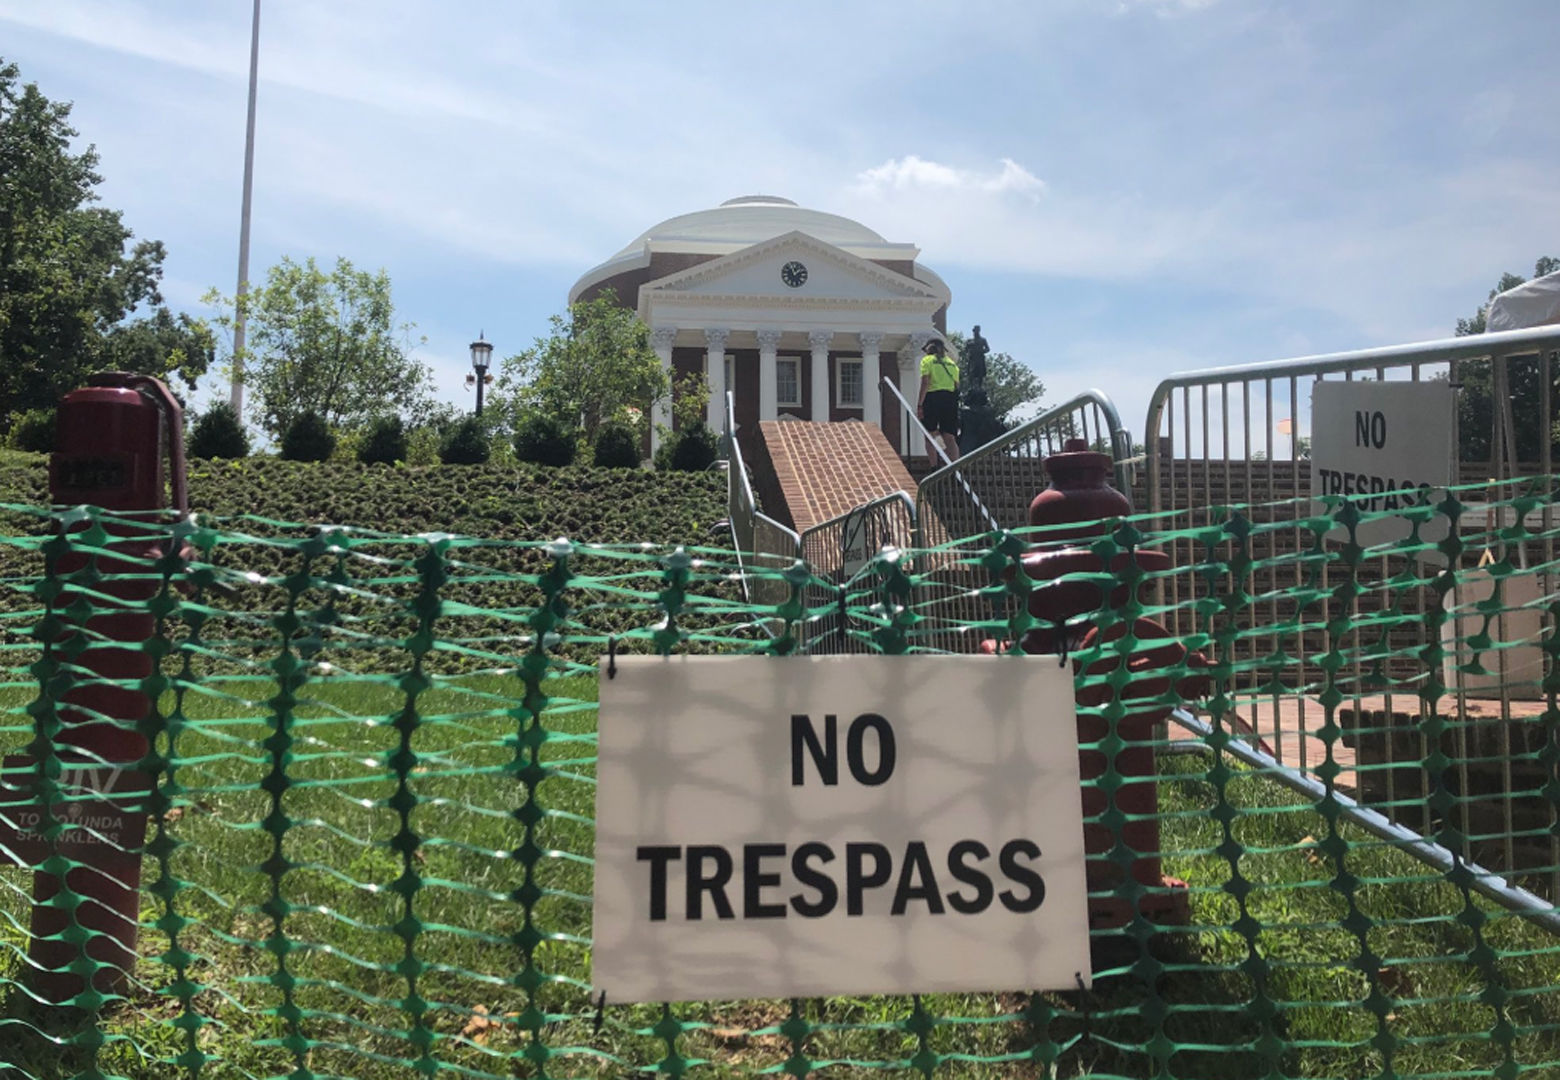 At University of Virginia, “no trespass” signs and barricades surround the rotunda ahead of a Saturday morning “reflection and renewal” university event with tight security and planned protests on Grounds. (WTOP/Max Smith)